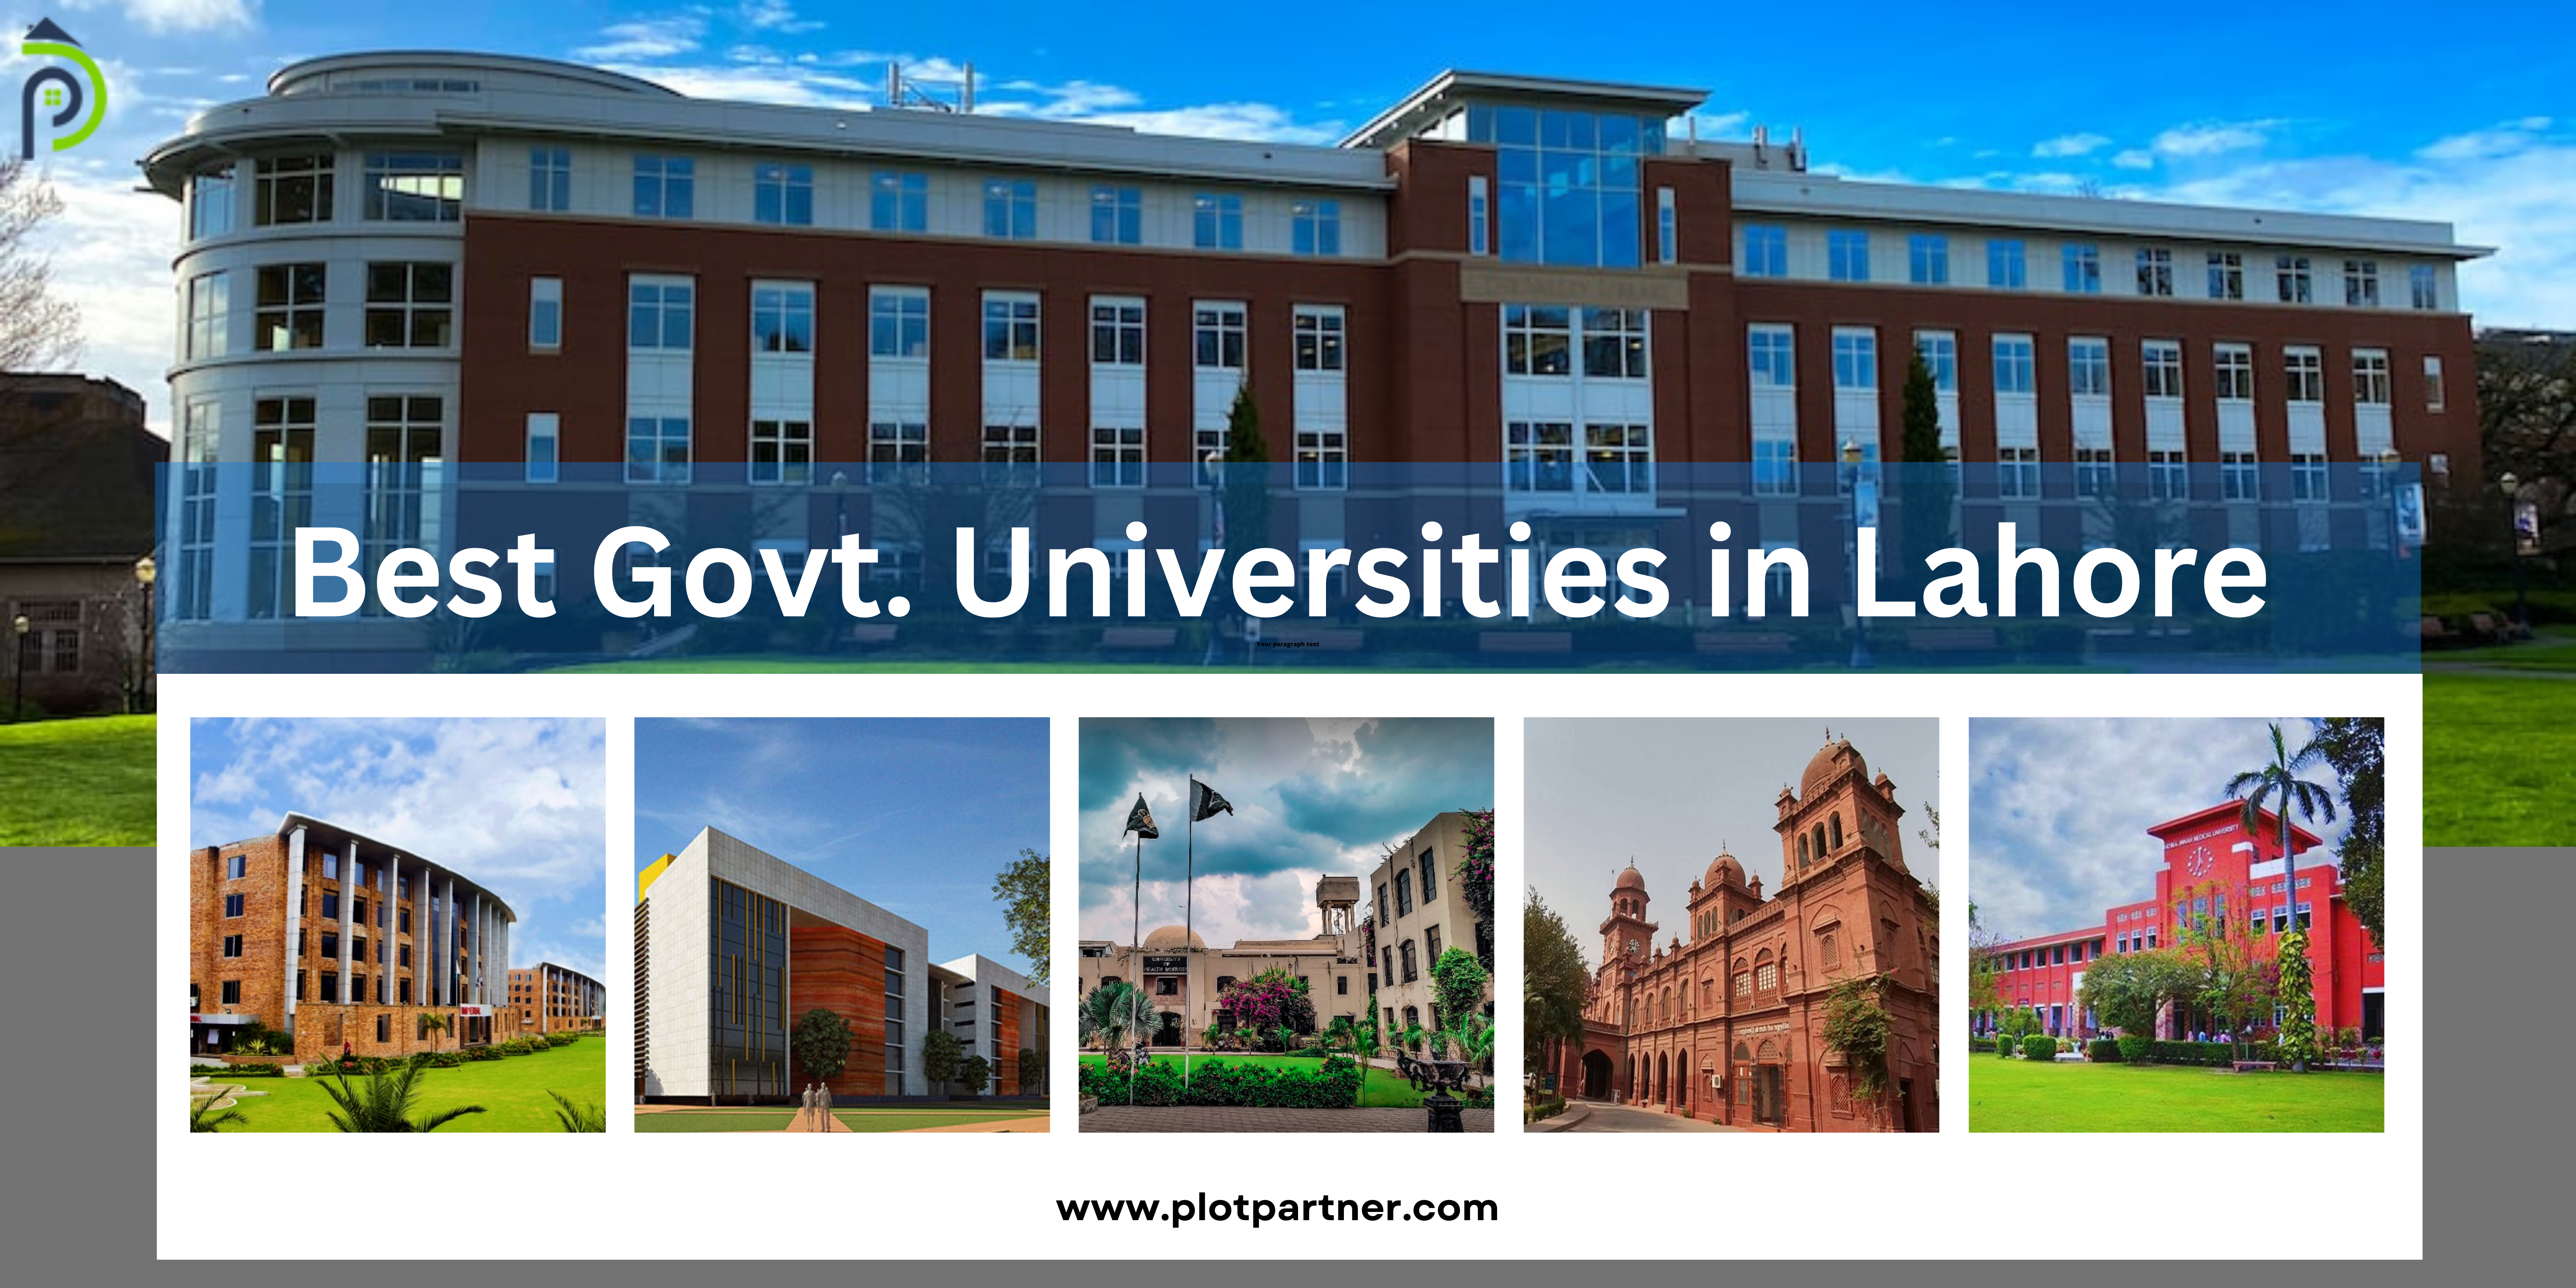 5 Best Government Universities in Lahore: A Comprehensive Guide